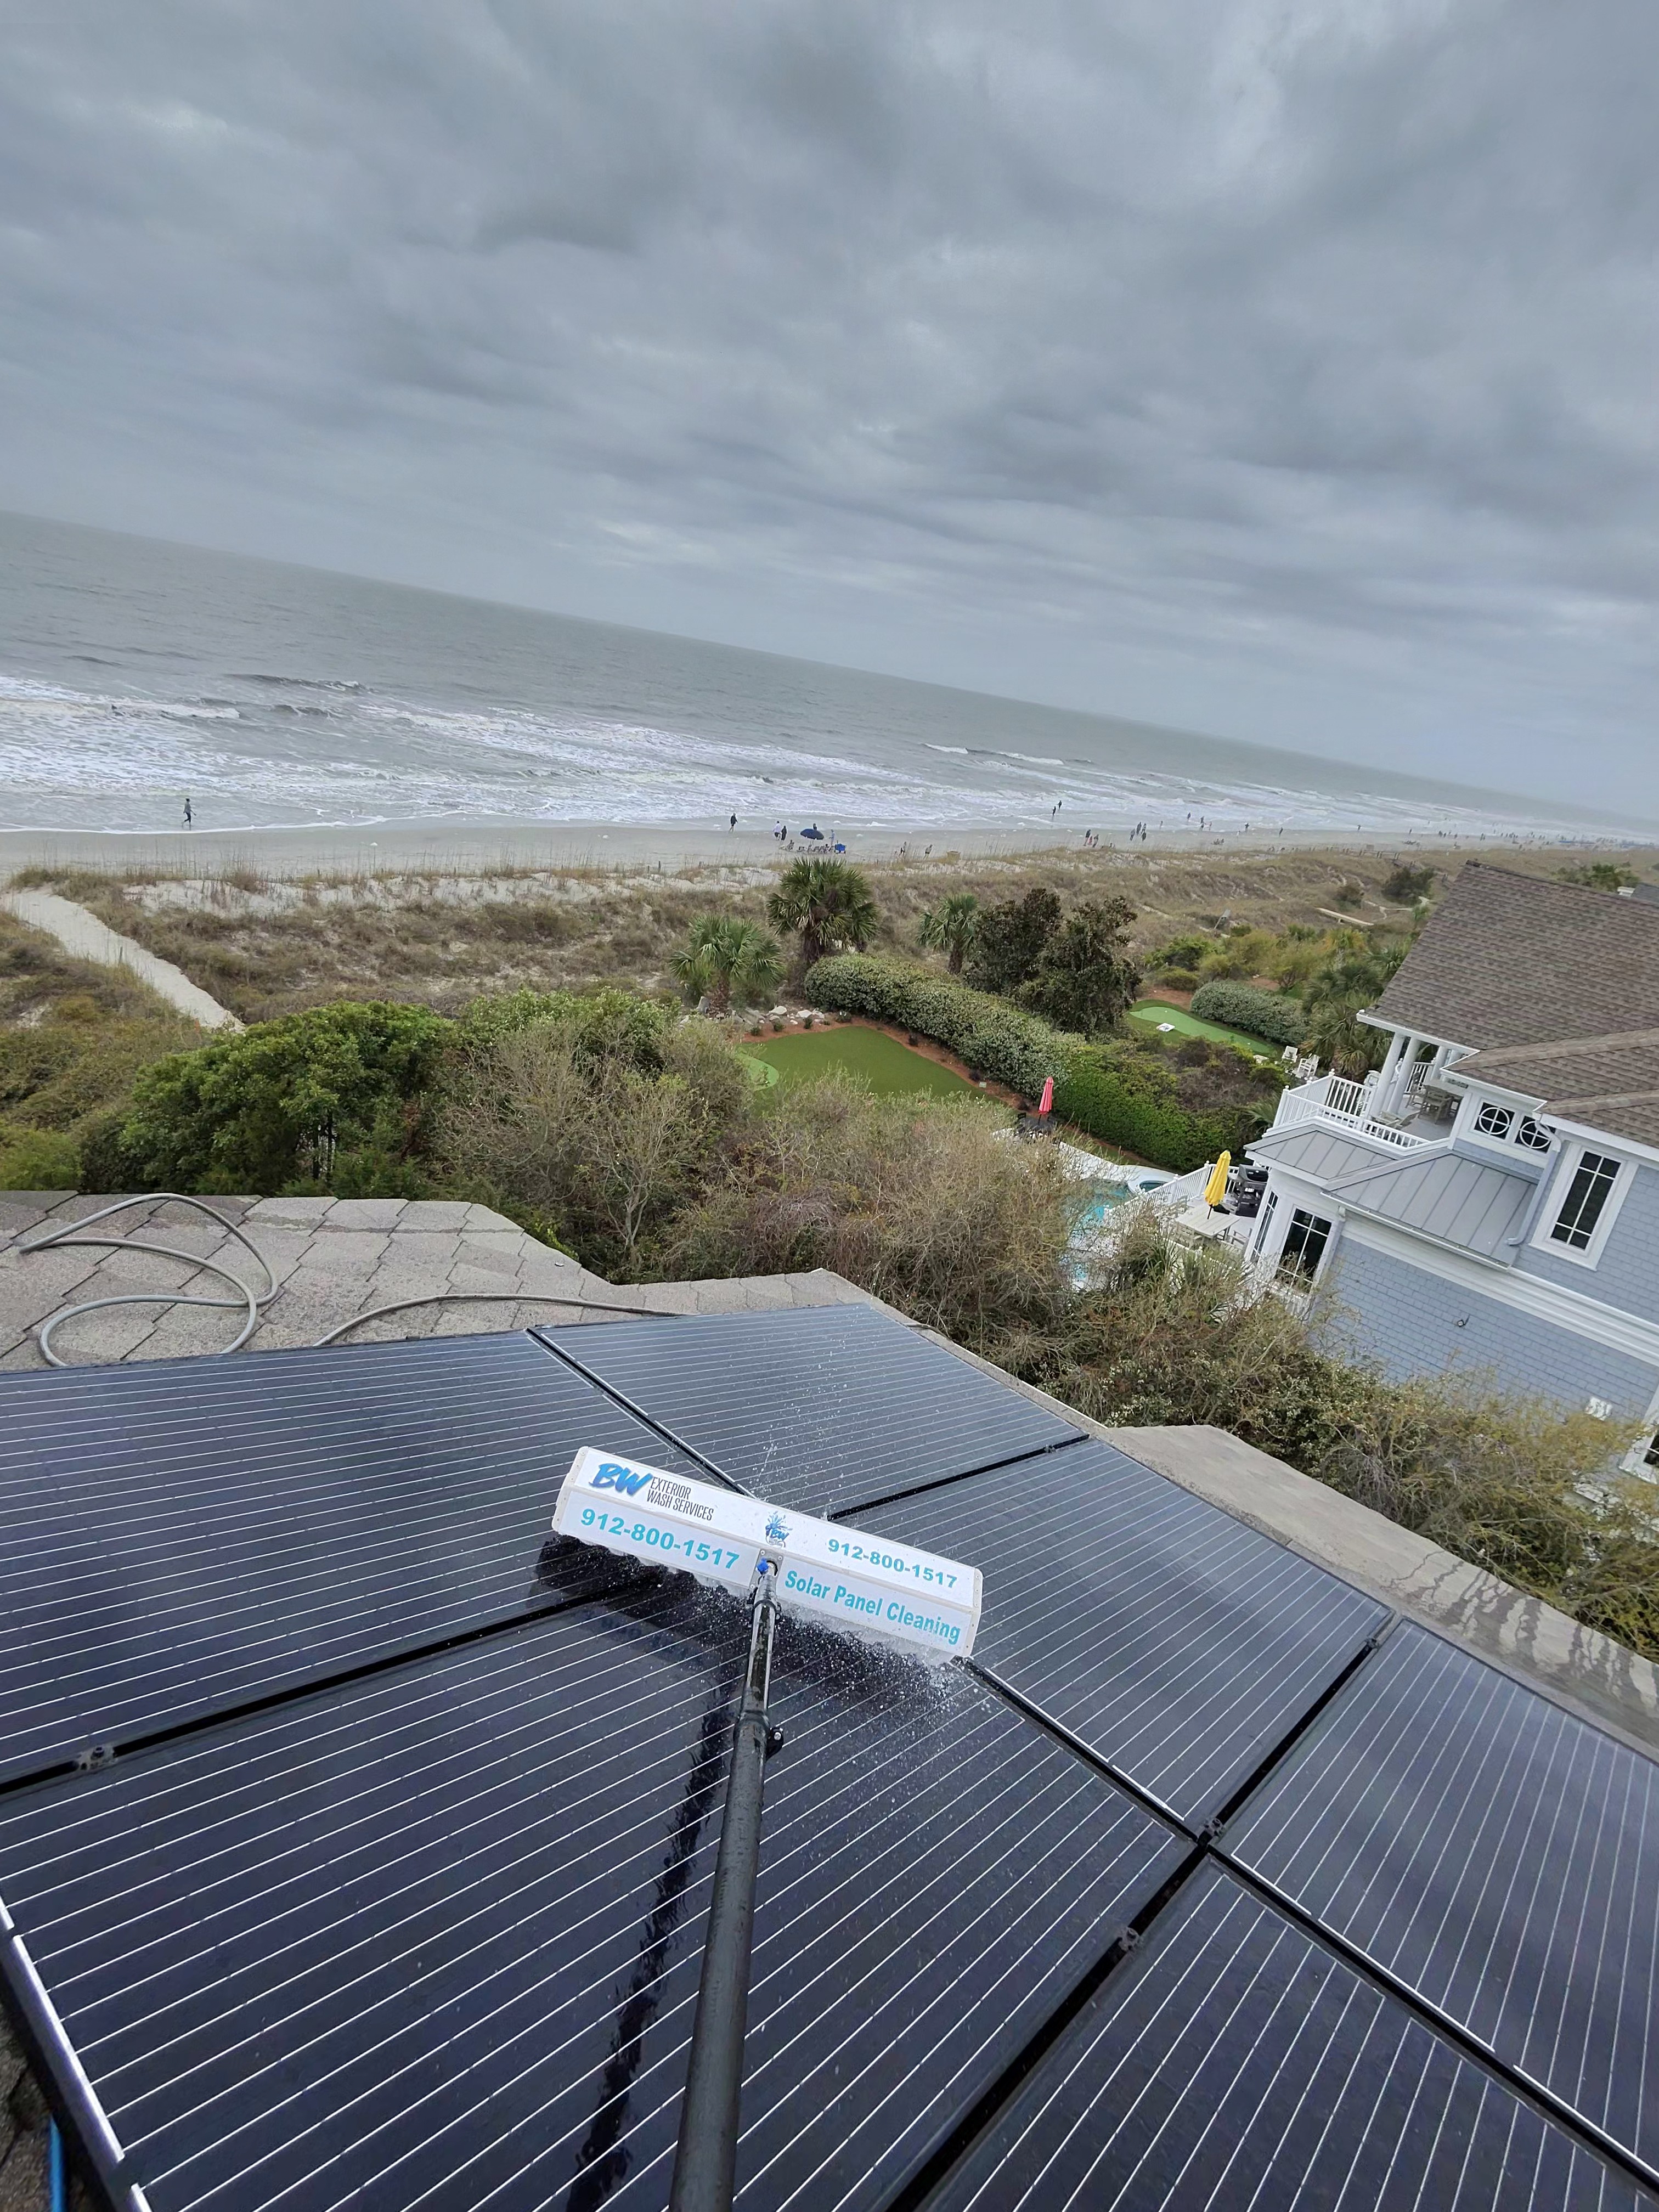 On the beach Solar Panel Cleaning 